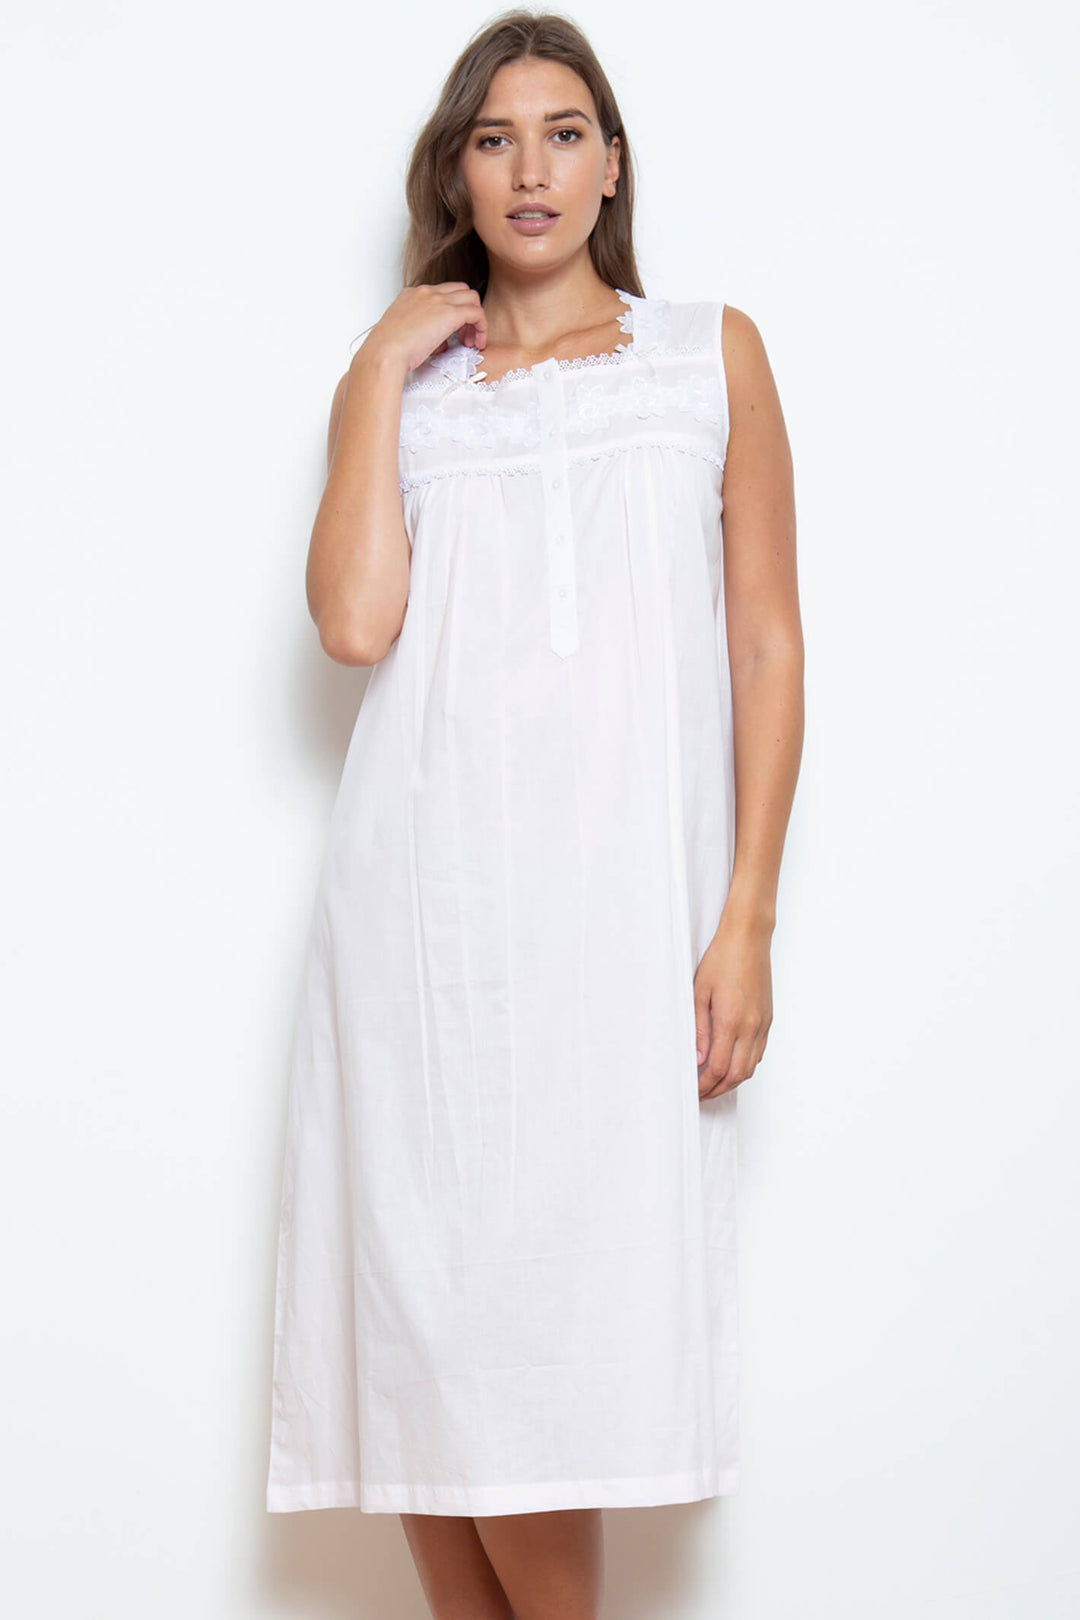 Cottonreal Helia Cotton Lawn Broderie Anglais Sleeveless Nightdress - Shirley Allum Boutique